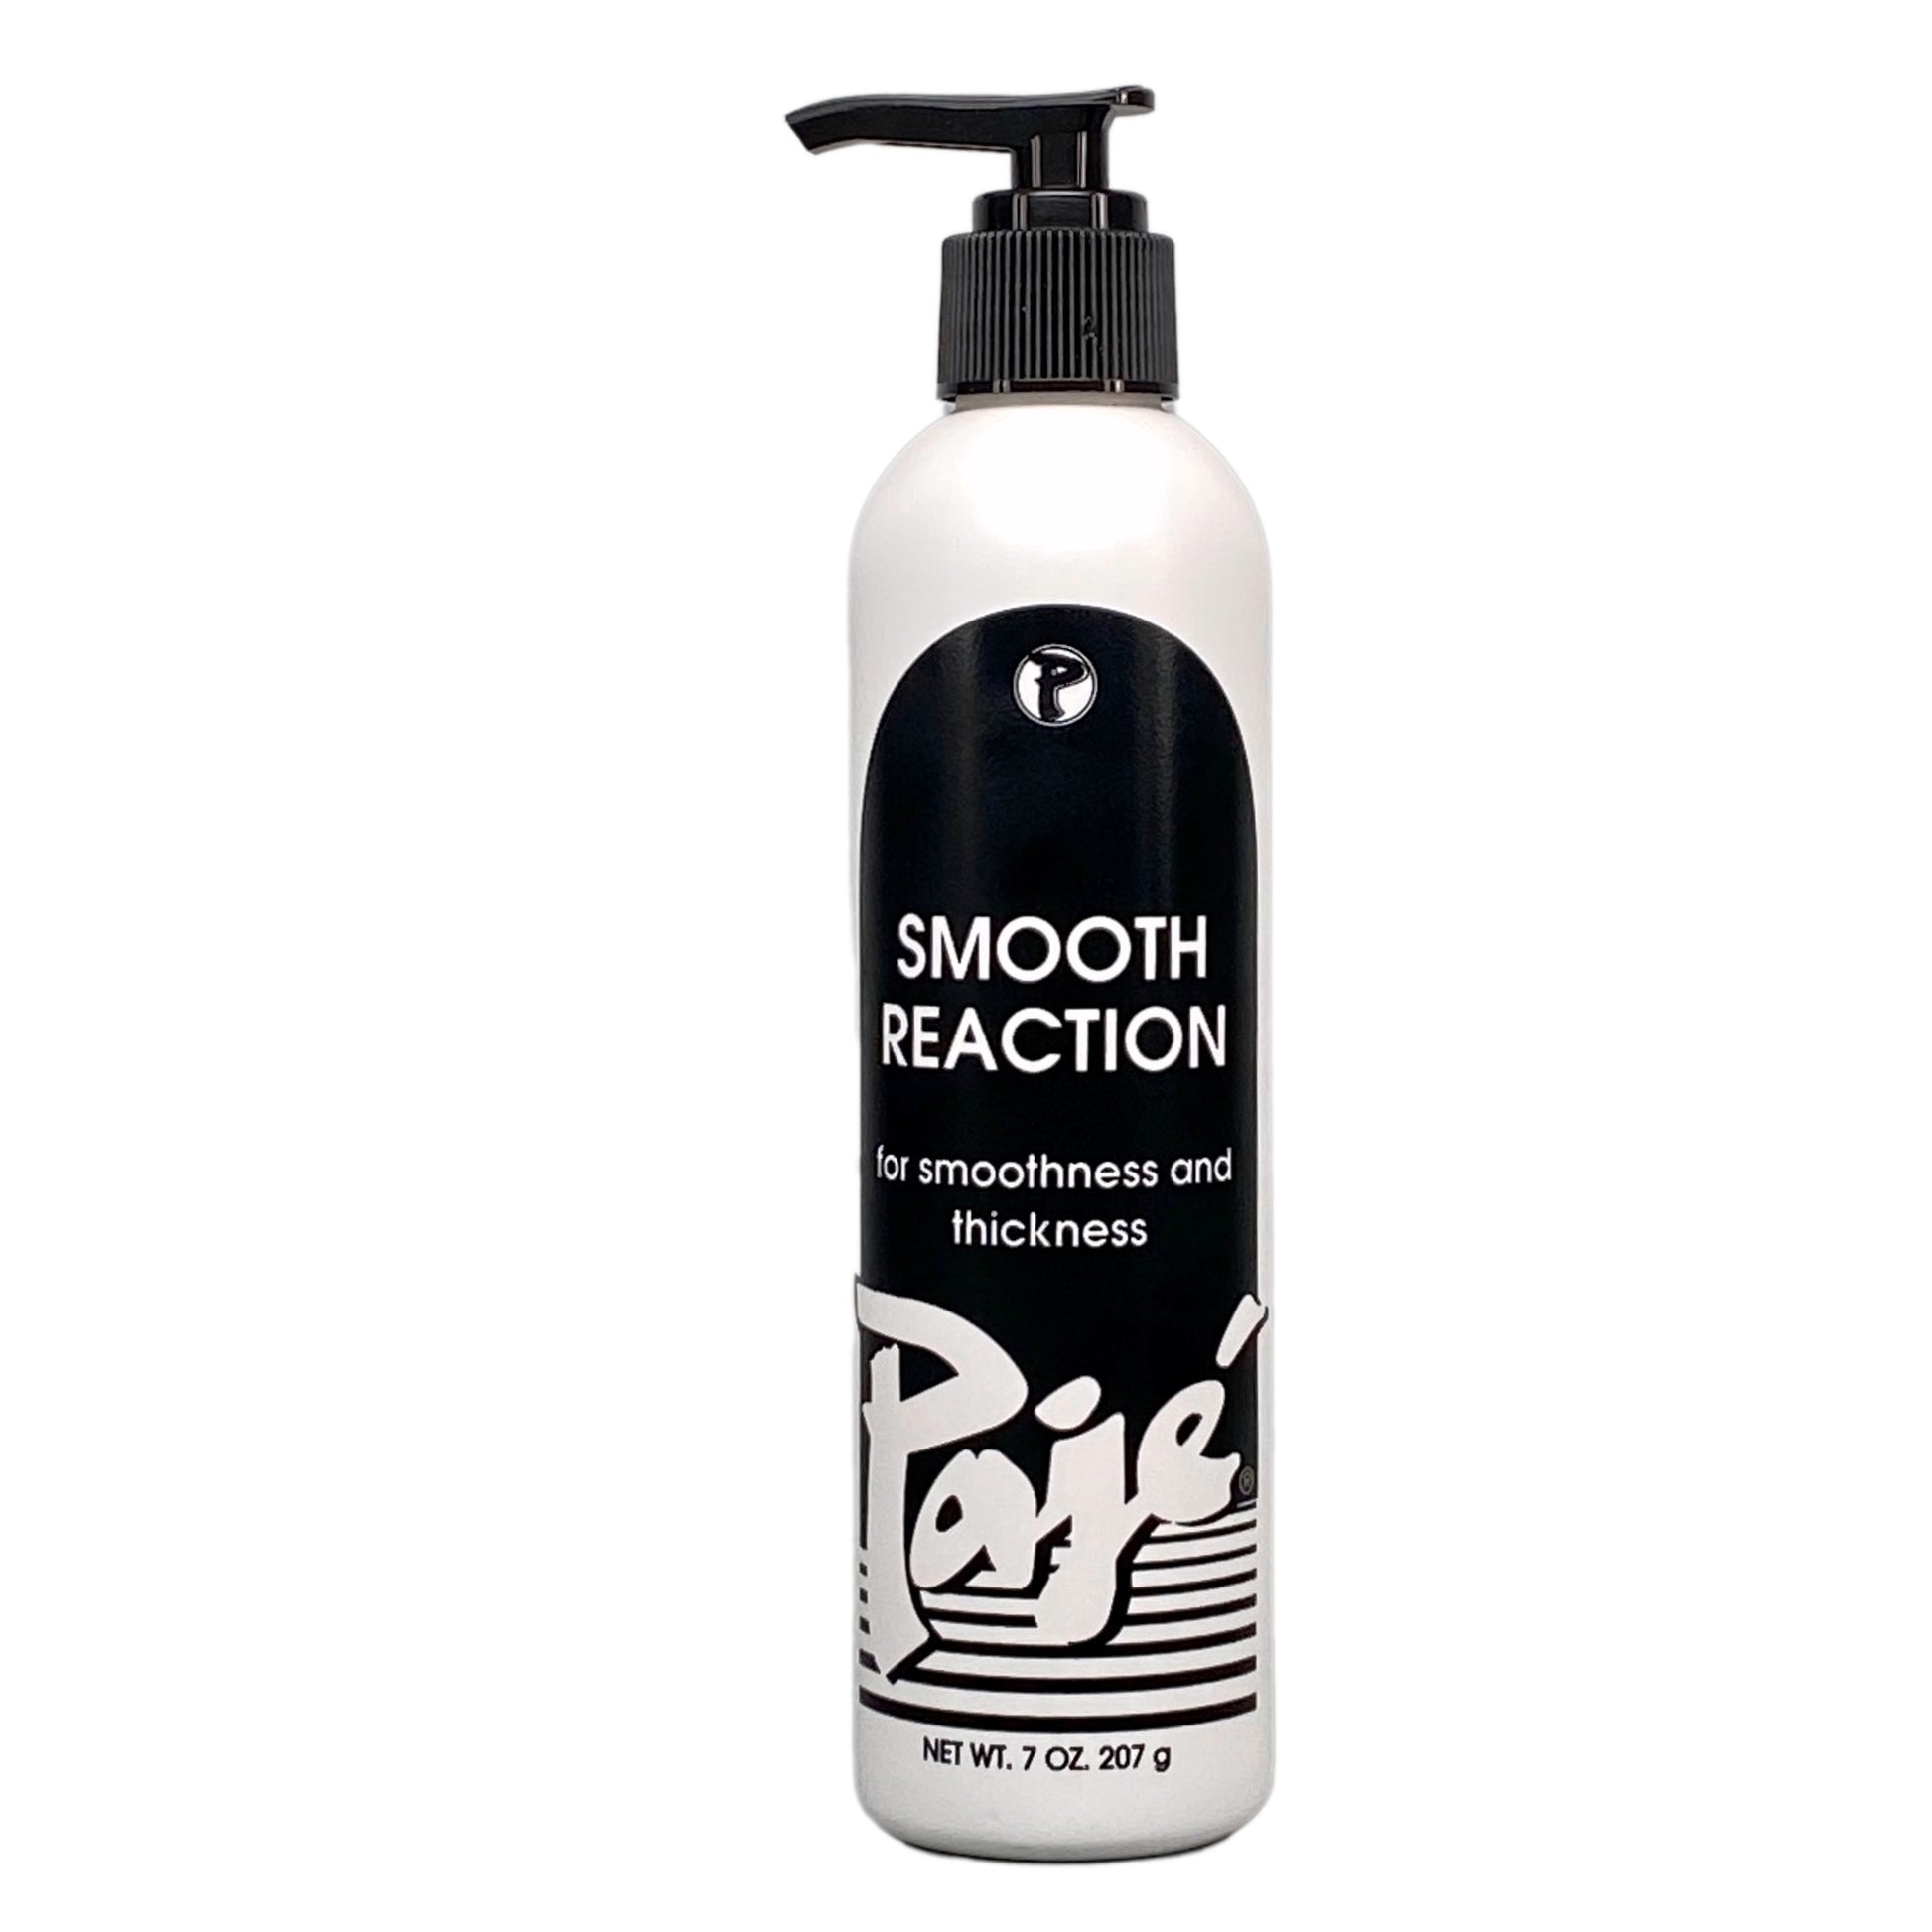 Pajé Smooth Reaction smoothness, shine, soft hold, volume, dimension, and protection all in one product. Smooth Reaction can be used on all hair types. Straighten curly, frizzy hair, or add life to thin, fine hair. Leaves hair with a tremendous amount of fullness and body when blow-dry styling or letting hair dry naturally. No Sodium Lauryl or Laureth Sulfates (SLS), Paraben, and Alcohol-free.